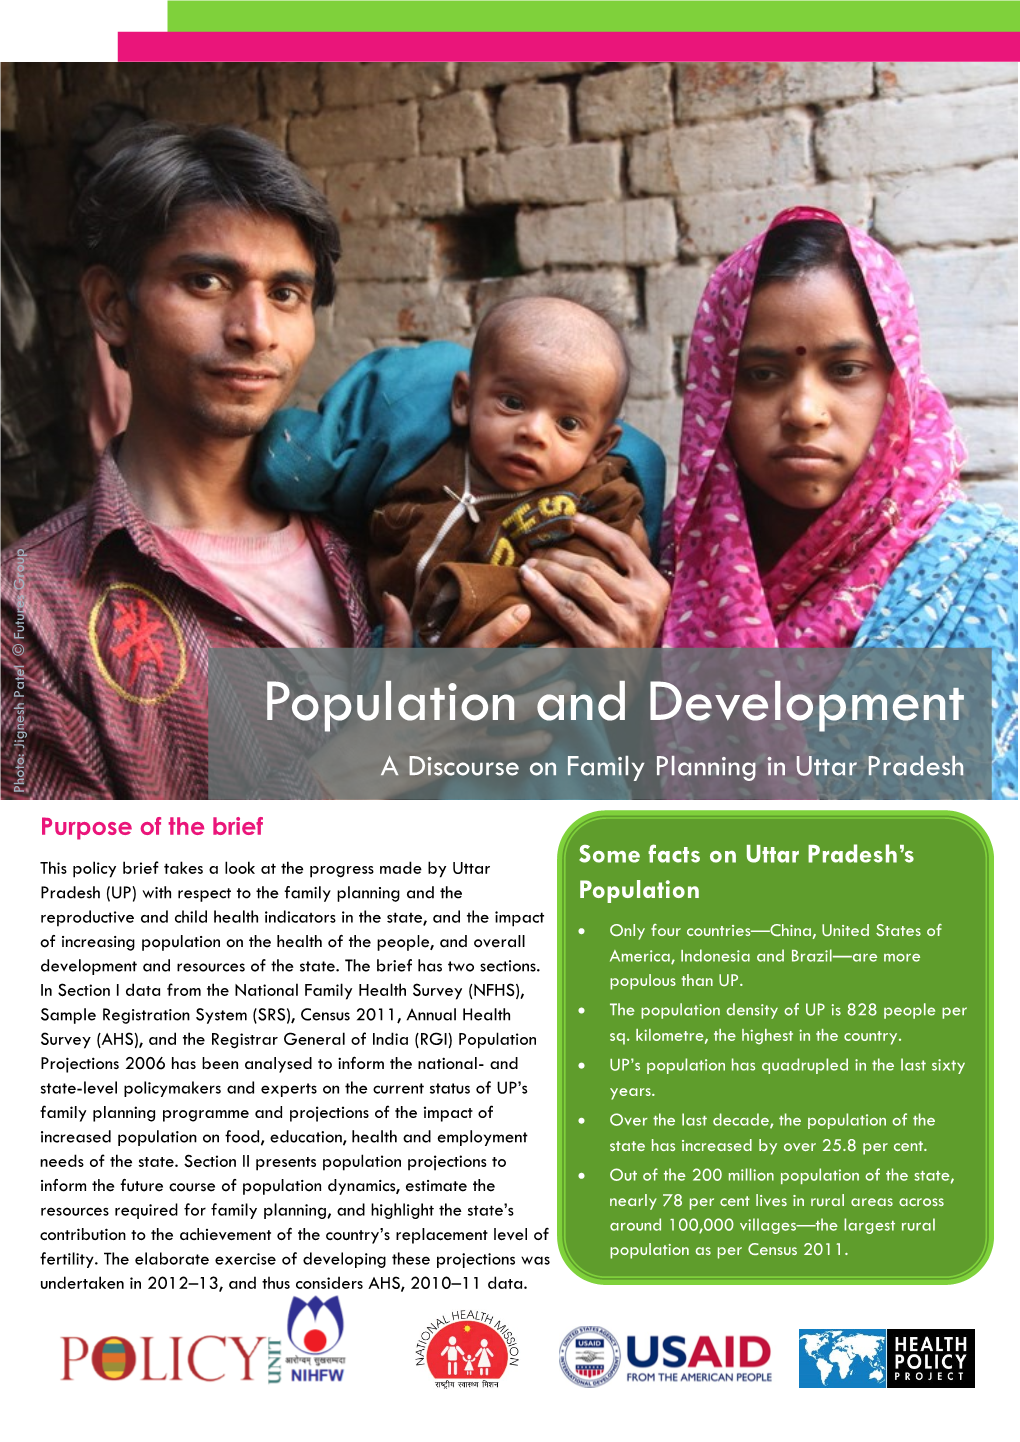 Population and Development- a Discourse on Family Planning In